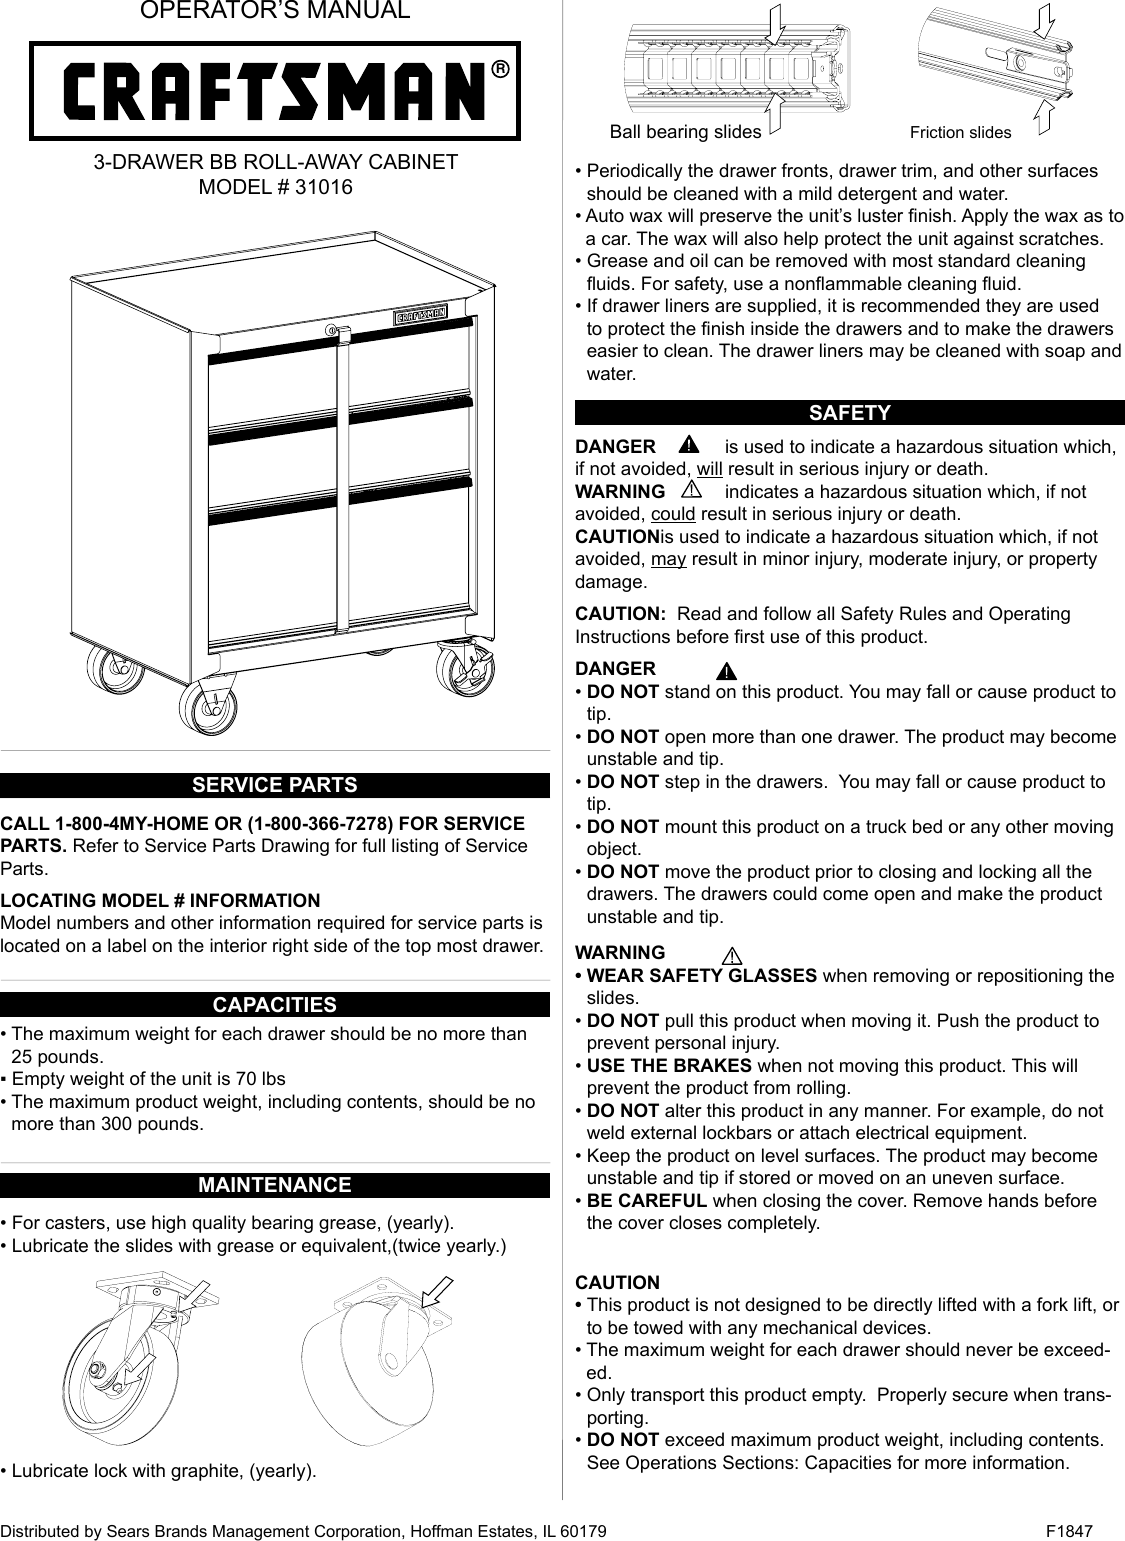 Page 1 of 8 - Craftsman Craftsman-26-In-Wide-3-Drawer-Standard-Duty-Ball-Bearing-Rolling-Cabinet-Black-Use-And-Care-Manual-  Craftsman-26-in-wide-3-drawer-standard-duty-ball-bearing-rolling-cabinet-black-use-and-care-manual